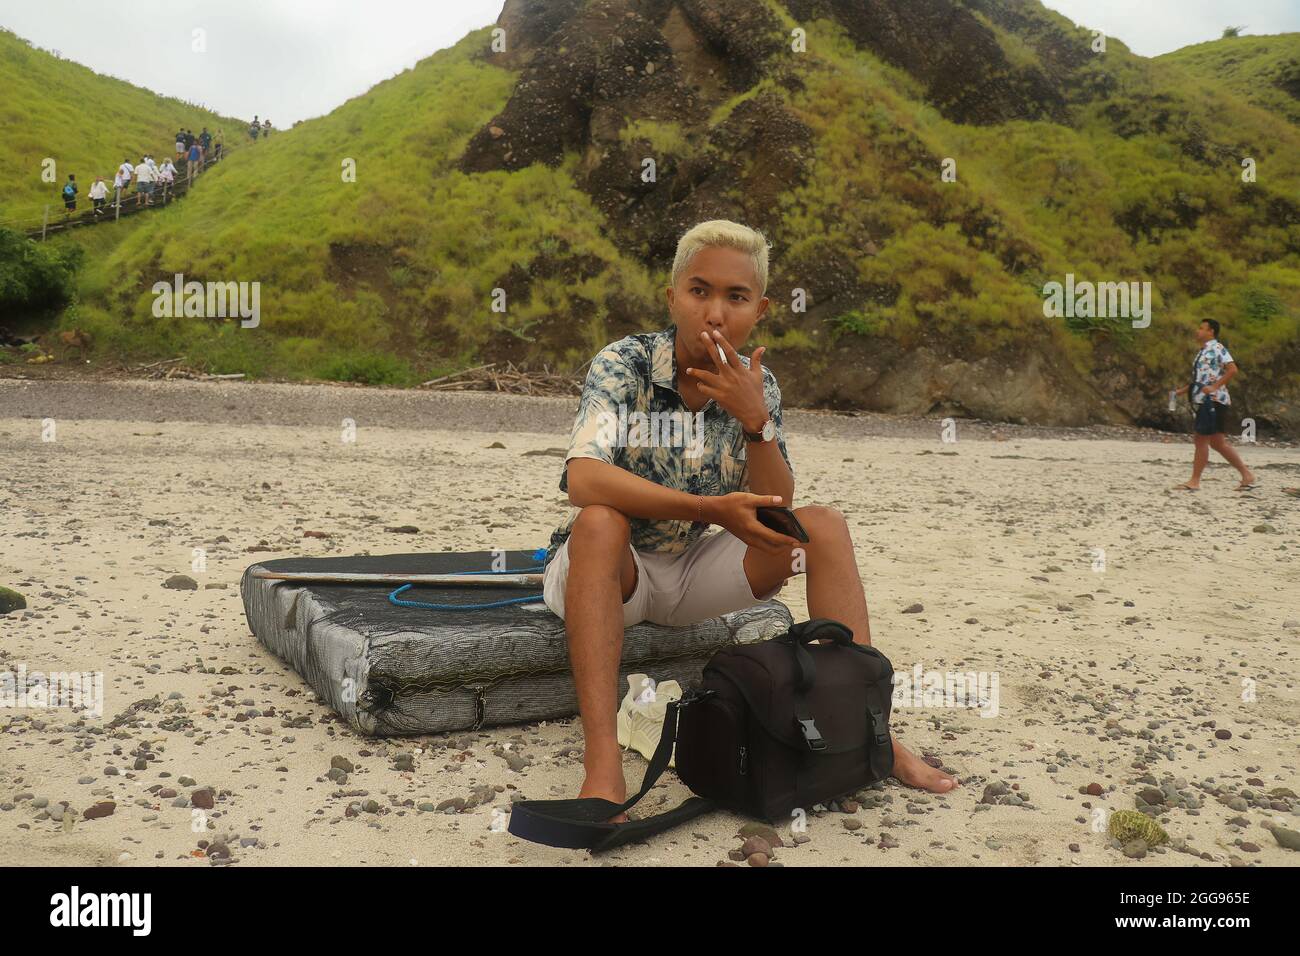 A young man sits on a board with hills on the background in Padar Island. Stock Photo